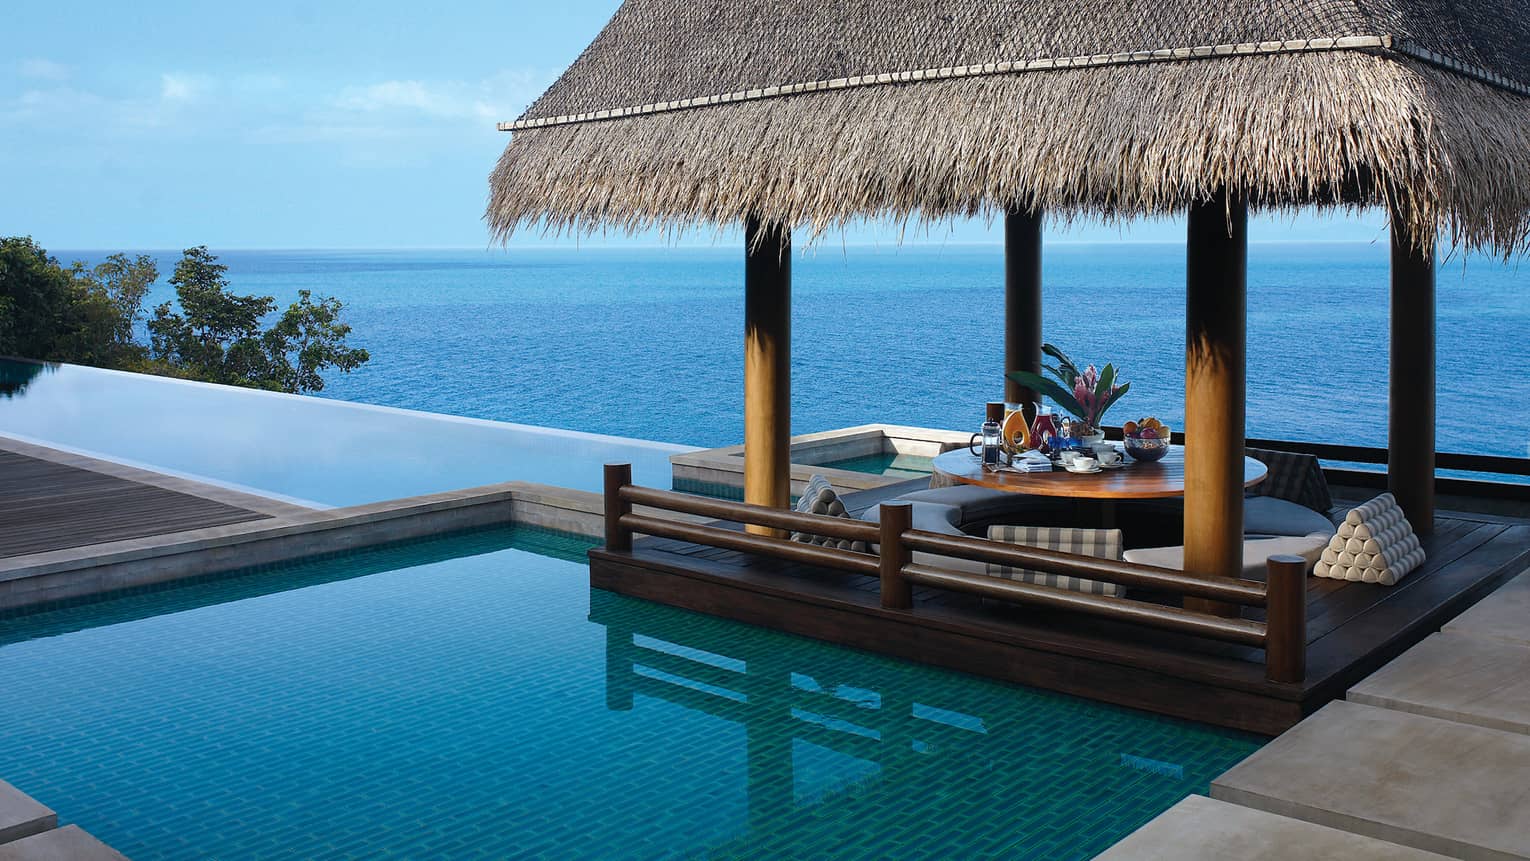 Infinity pool overlooking the Gulf of Thailand with a thatched-roof cabana